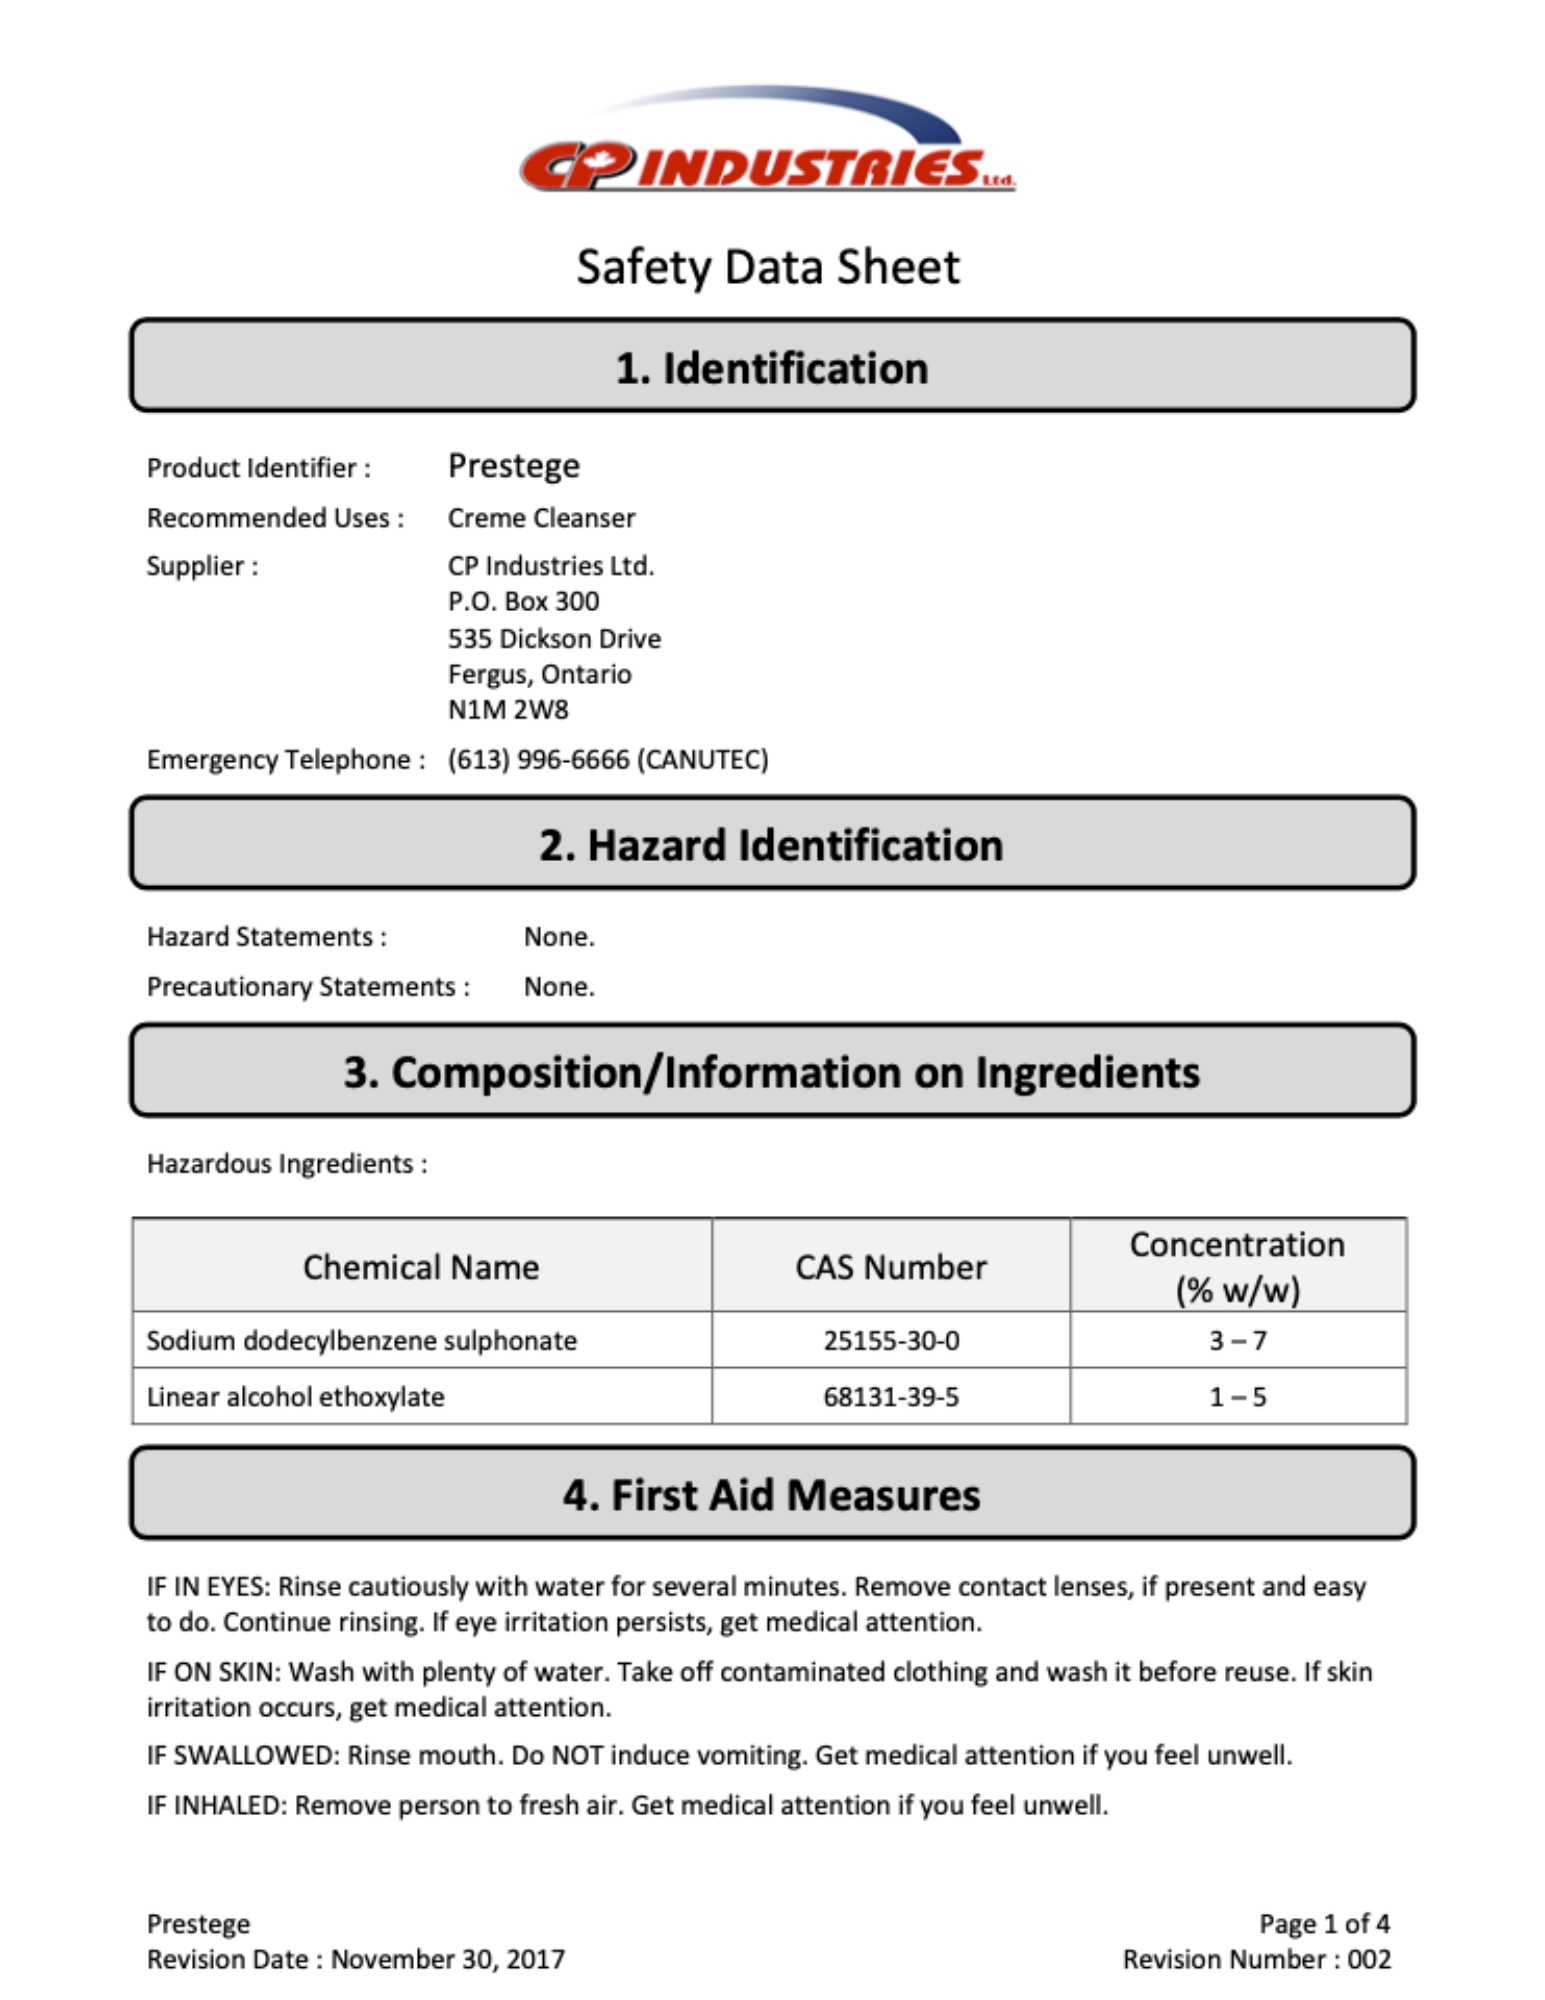 CP Industries safety data sheet for Prestege.